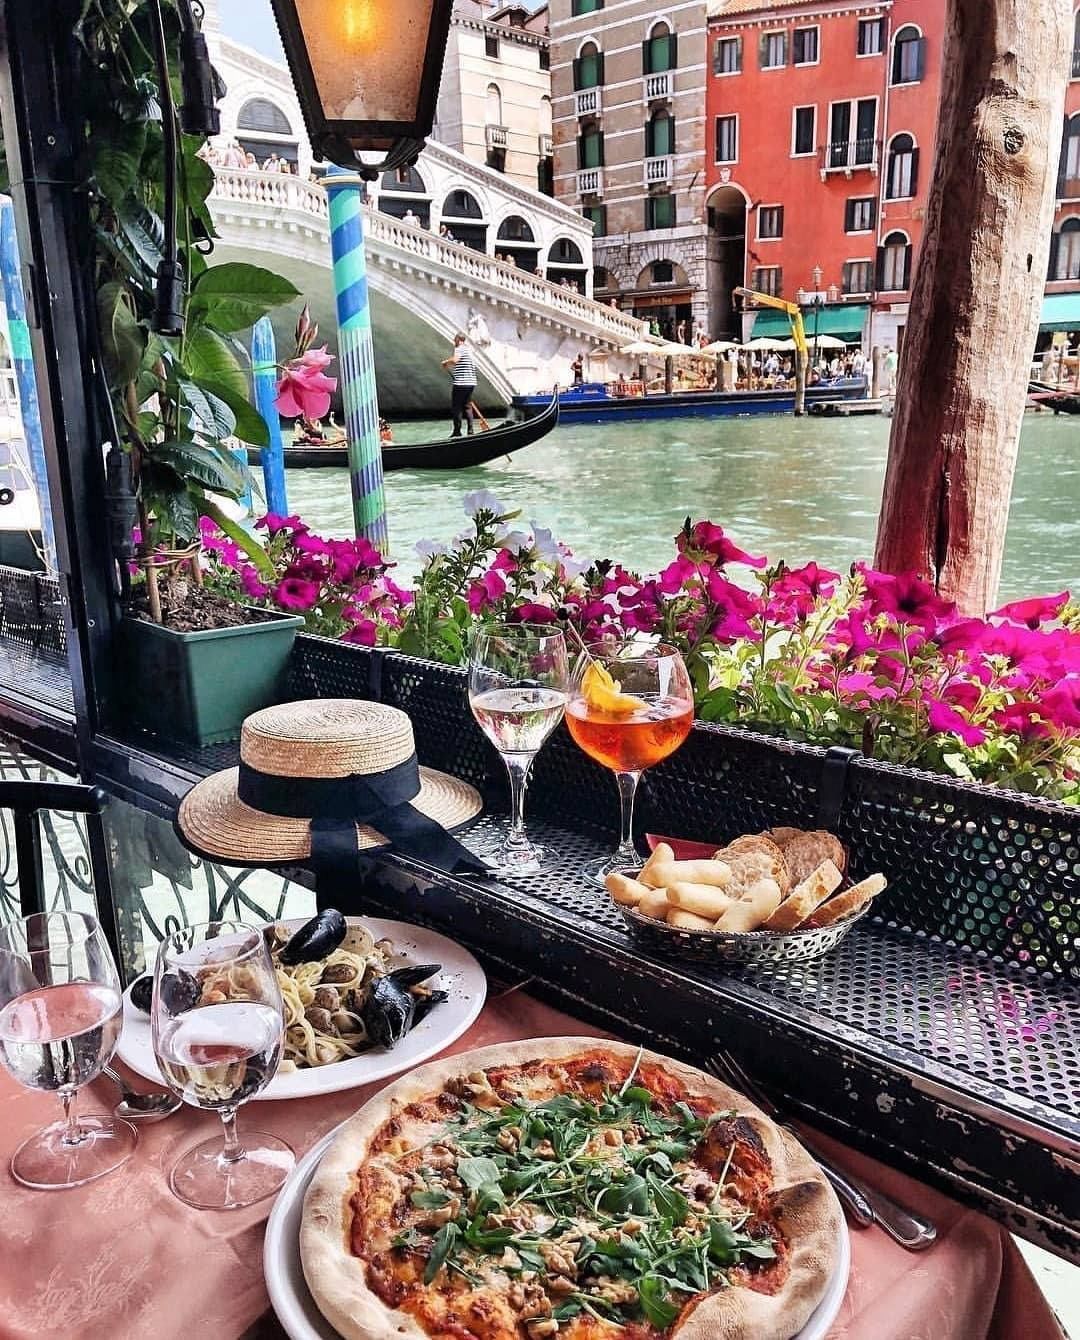 Plates of food and glasses of wine on table next to Venice canal in Italy